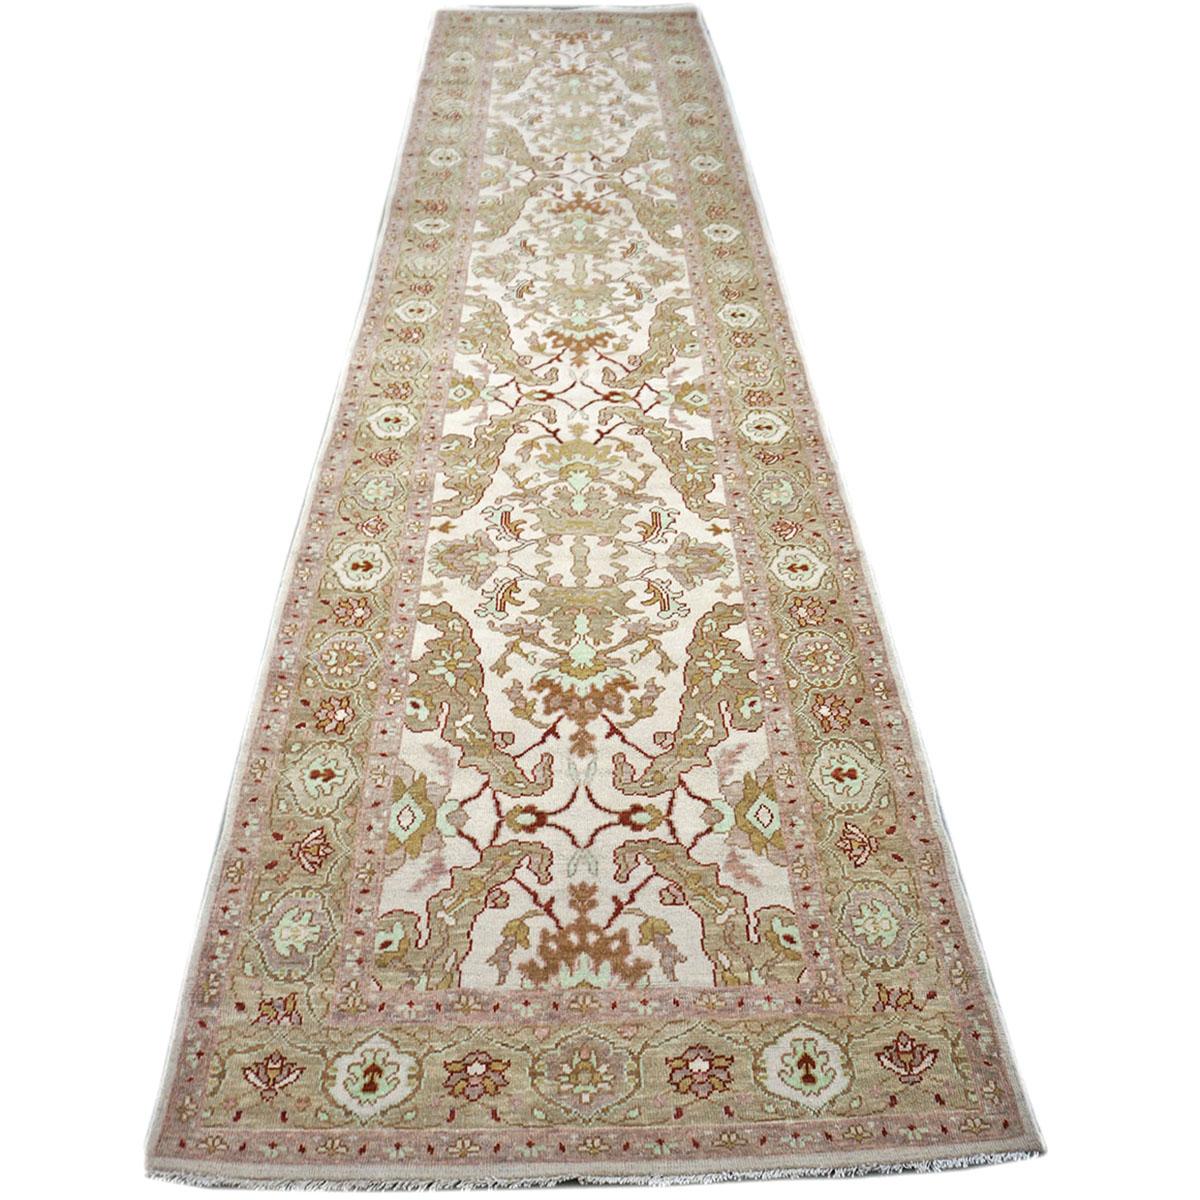 Ashly Fine Rugs presents an antique recreation of an original Persian Sultanabad hallway runner rug. Persian Sultanabads are perhaps the most desired rugs by both connoisseurs and interior designers. Made with all vegetable-dyed, handspun wool and